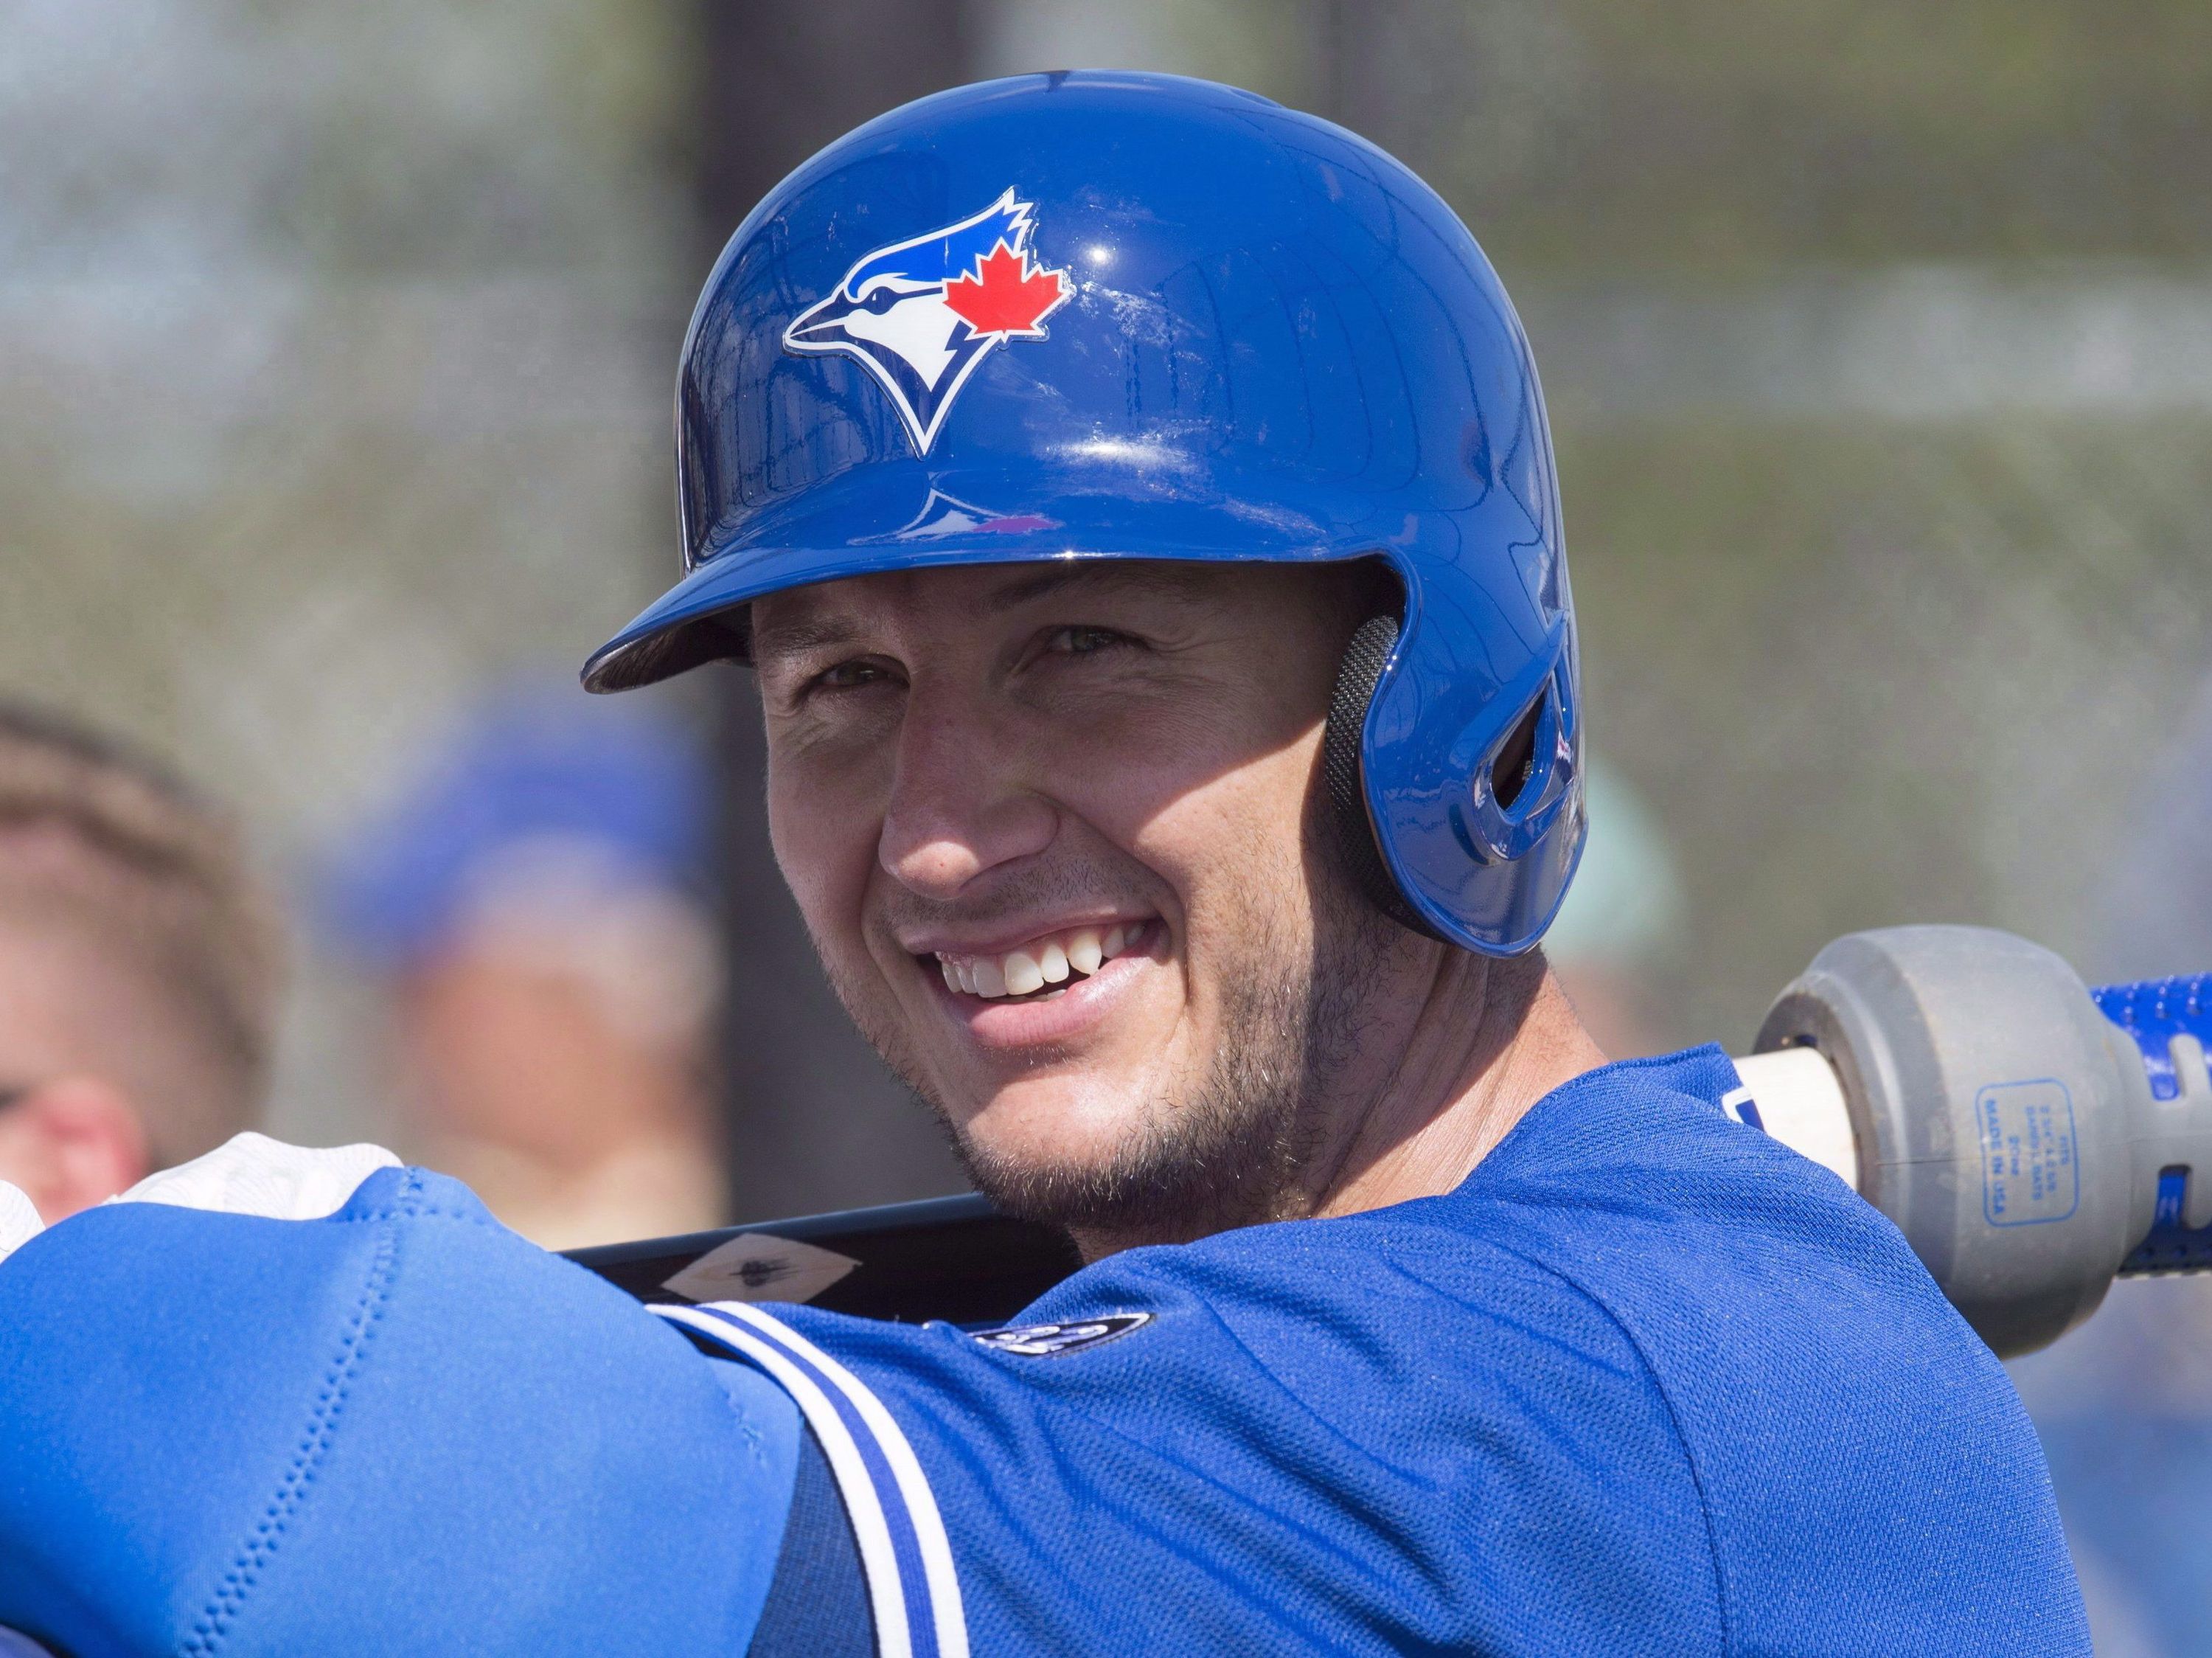 Big man Tulowitzki wants challenge of playing shortstop for rest of career